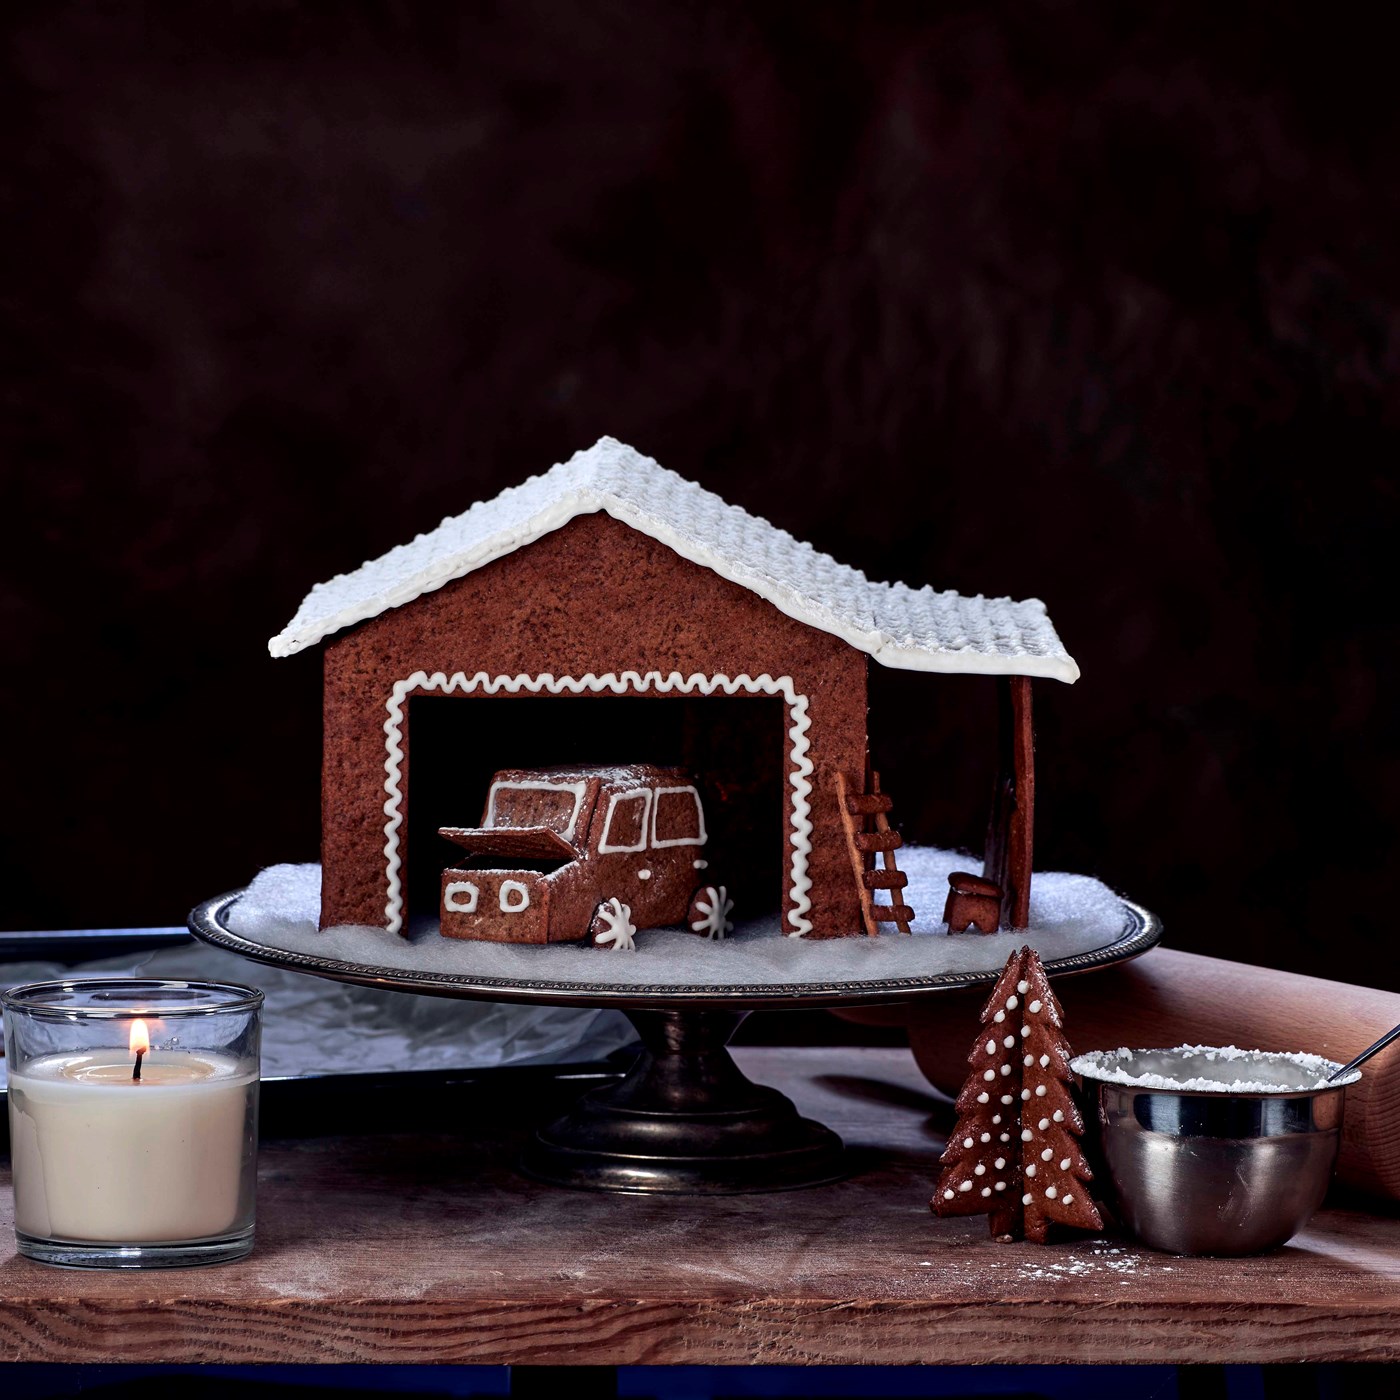 5 tips for successful construction of a gingerbread building